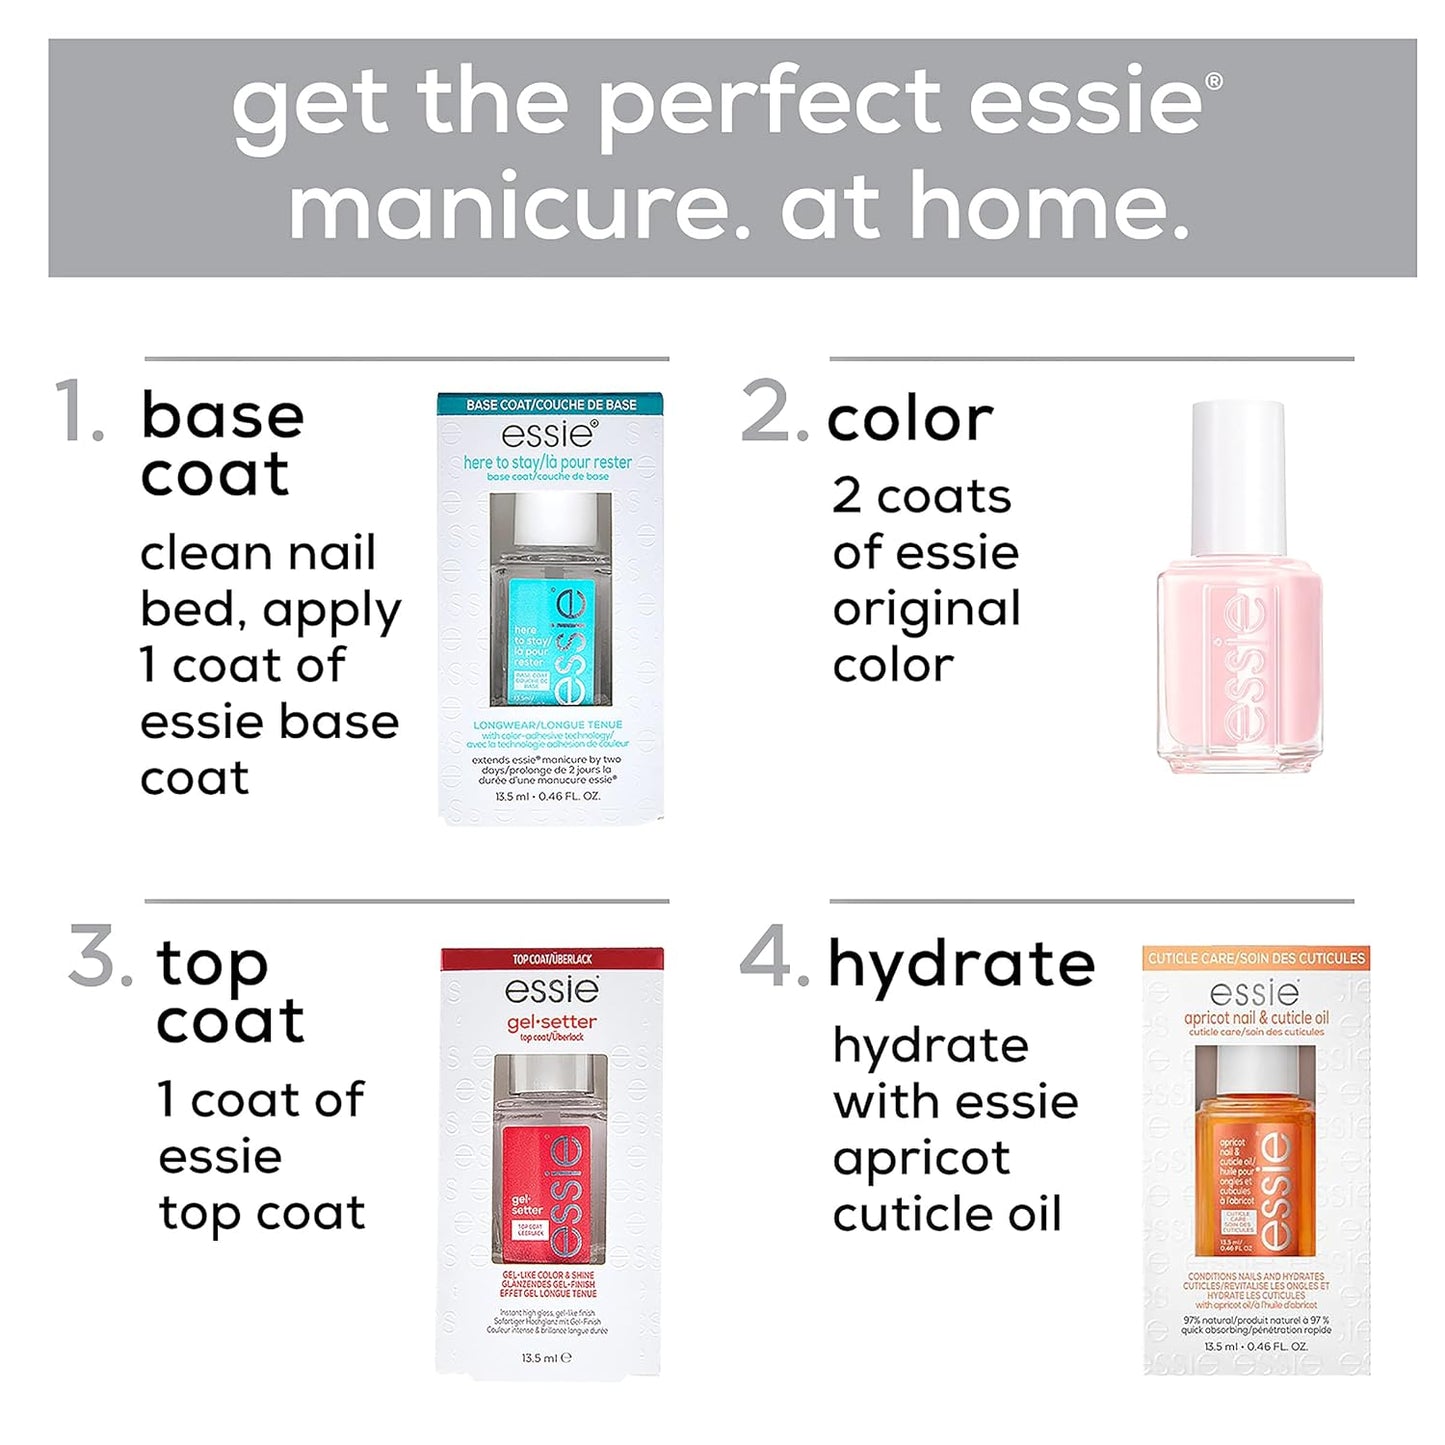 essie nail polish, ferris of them all collection, muted orange-red nail color with a shimmer finish, make no concessions, 0.4600 fl. oz.